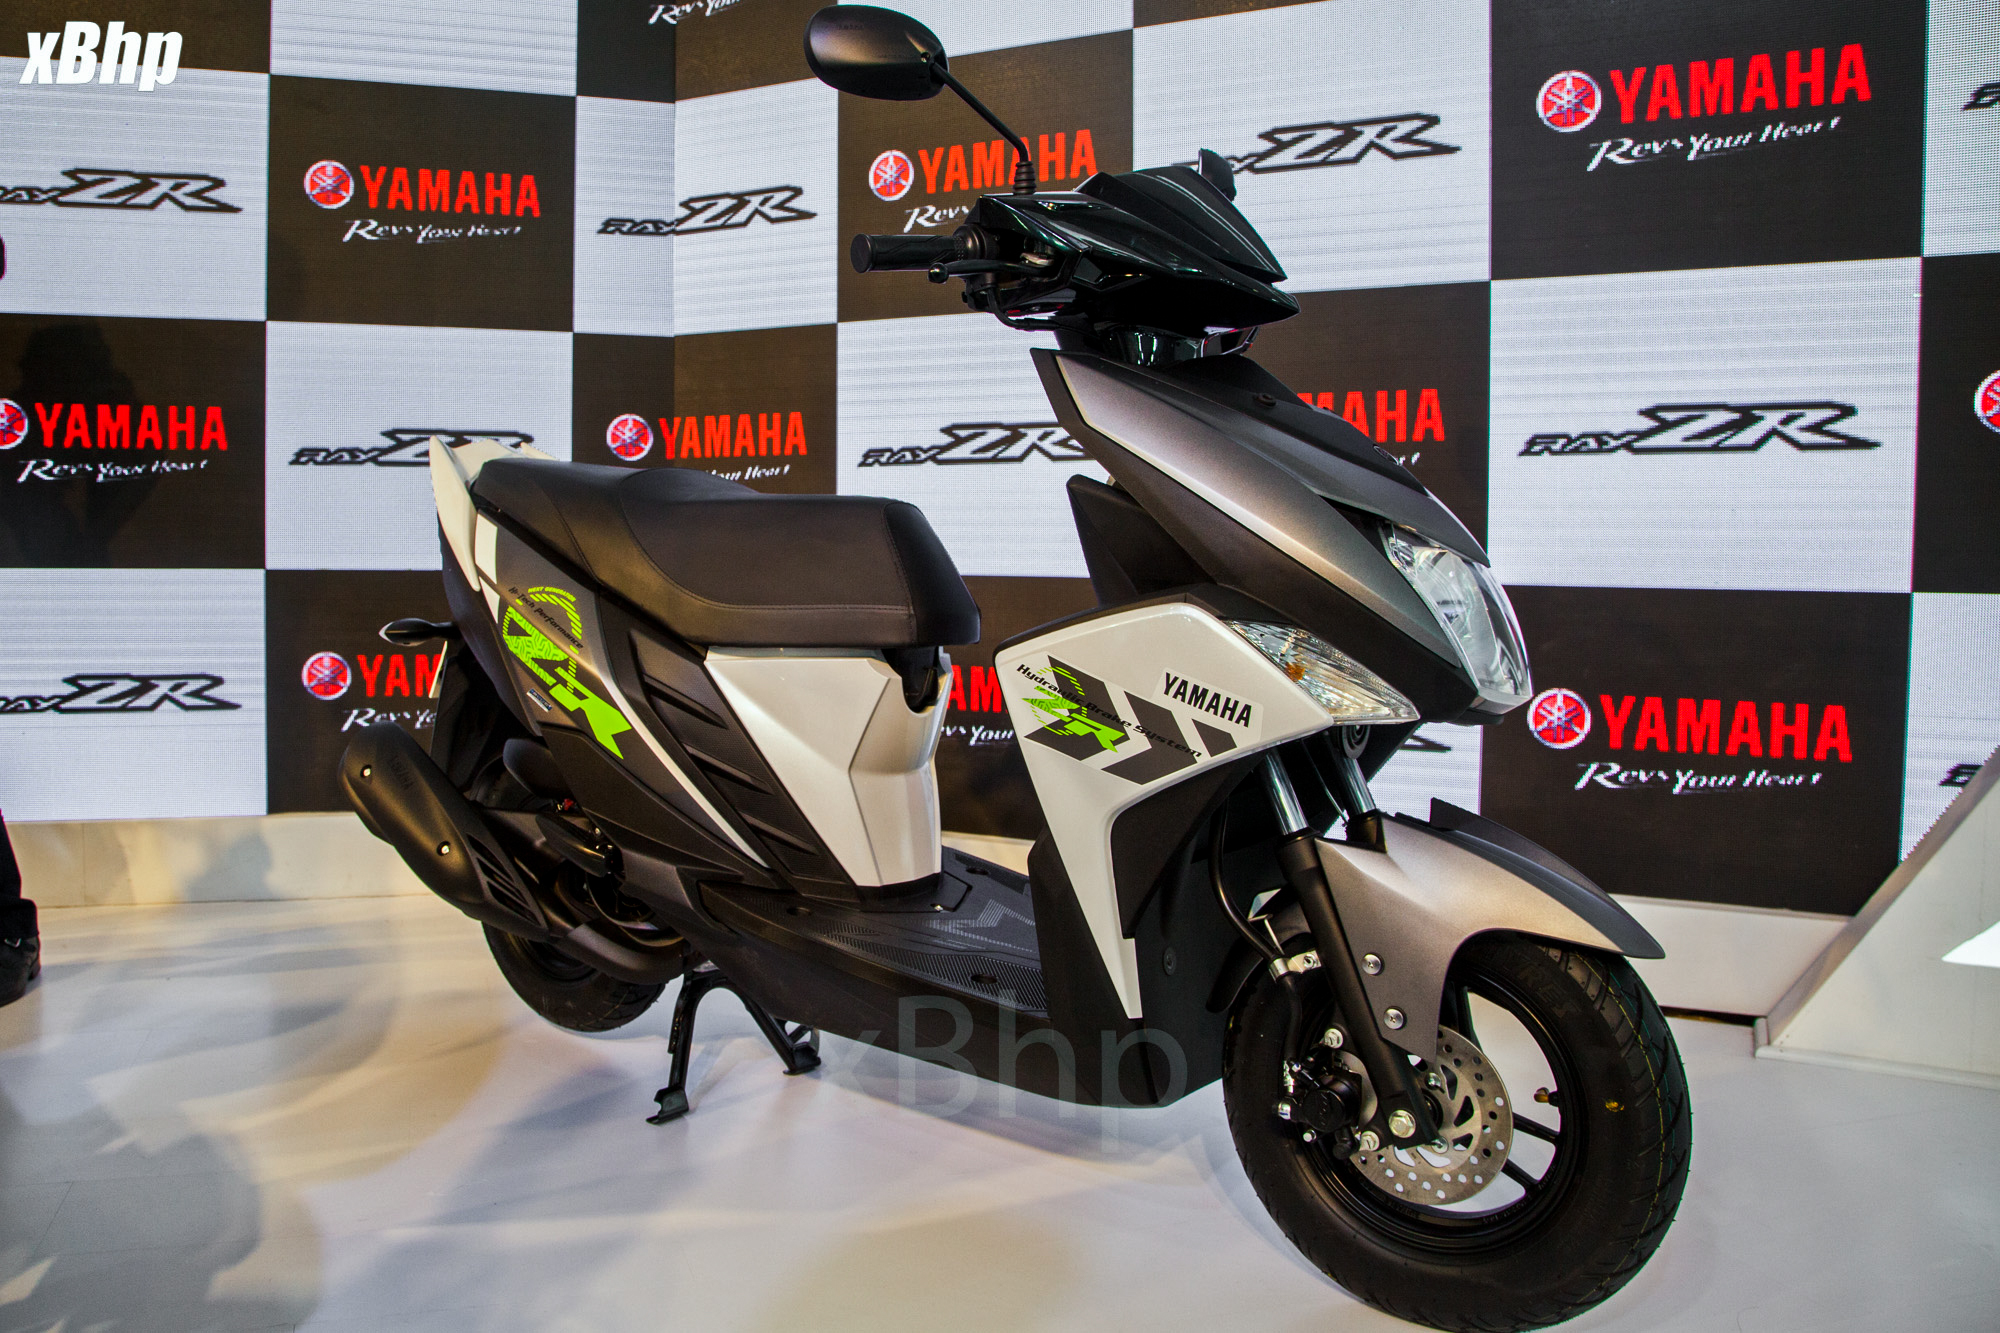 Yamaha Cygnus Ray ZR launched in Delhi at 52,000 INR